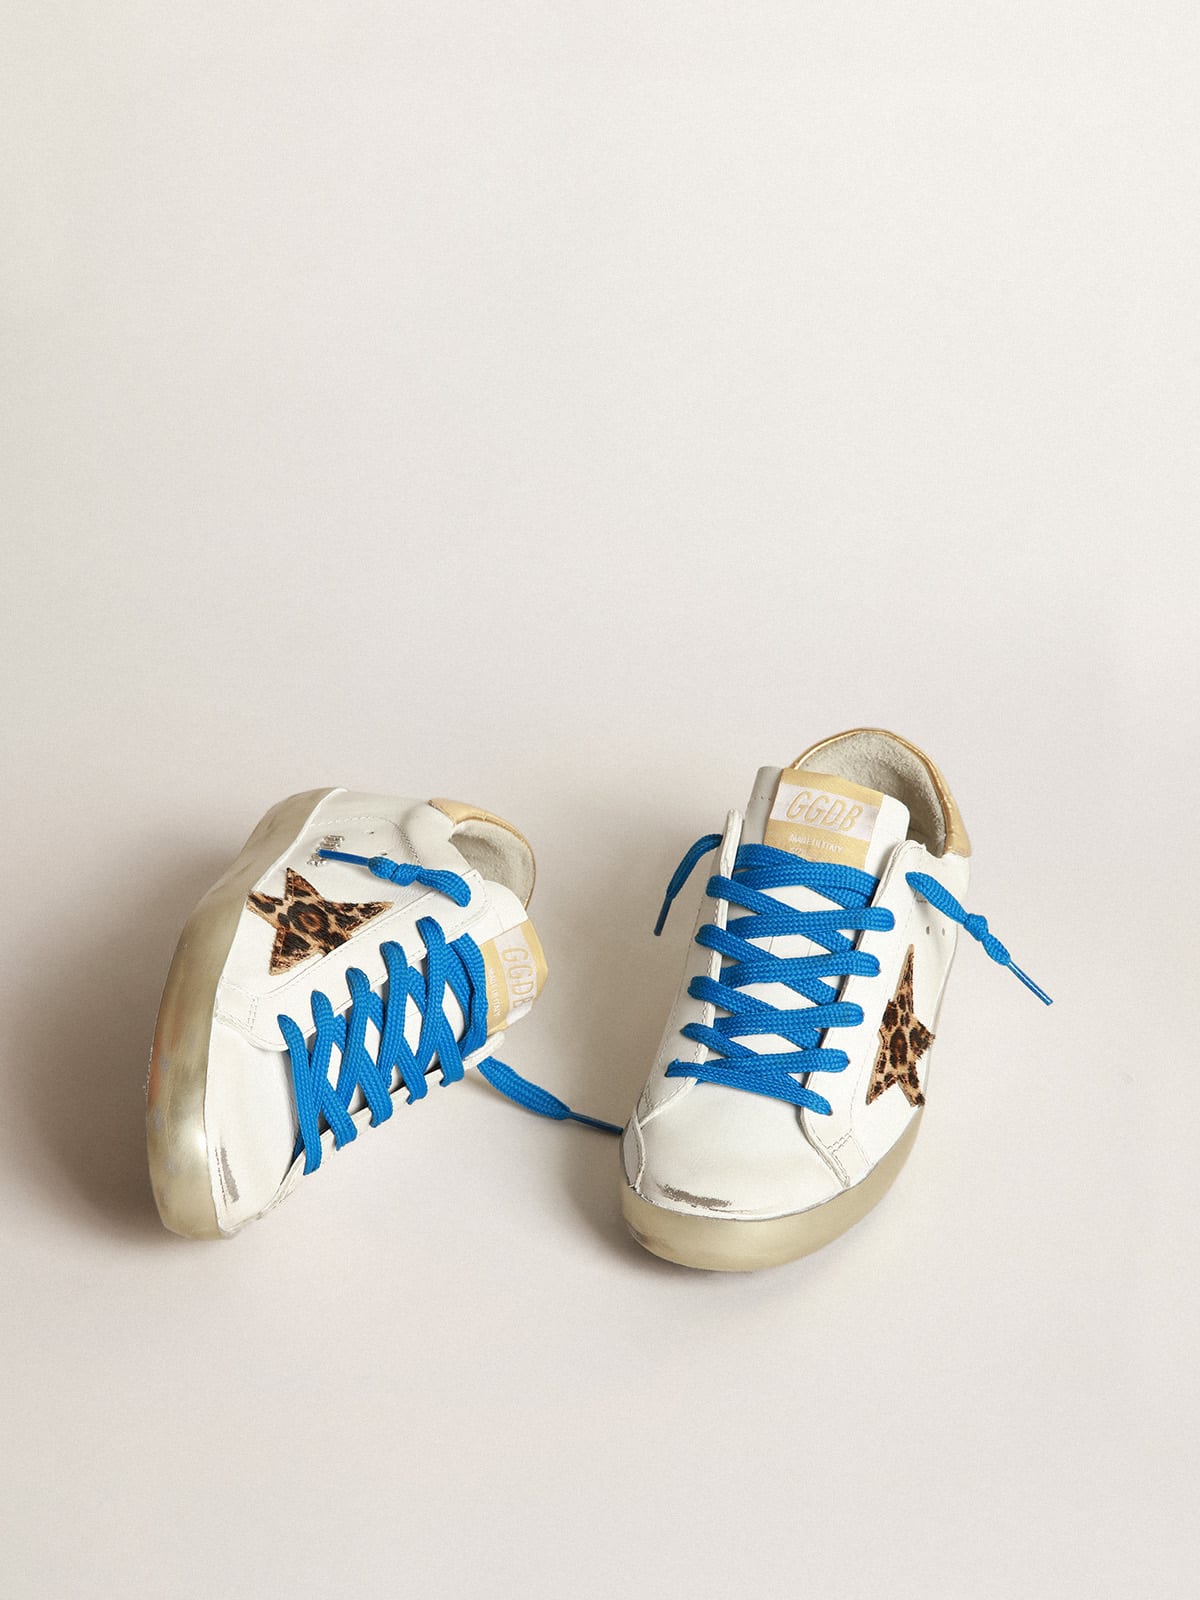 Golden Goose - Super-Star sneakers with sparkly foxing and leopard-print star in 